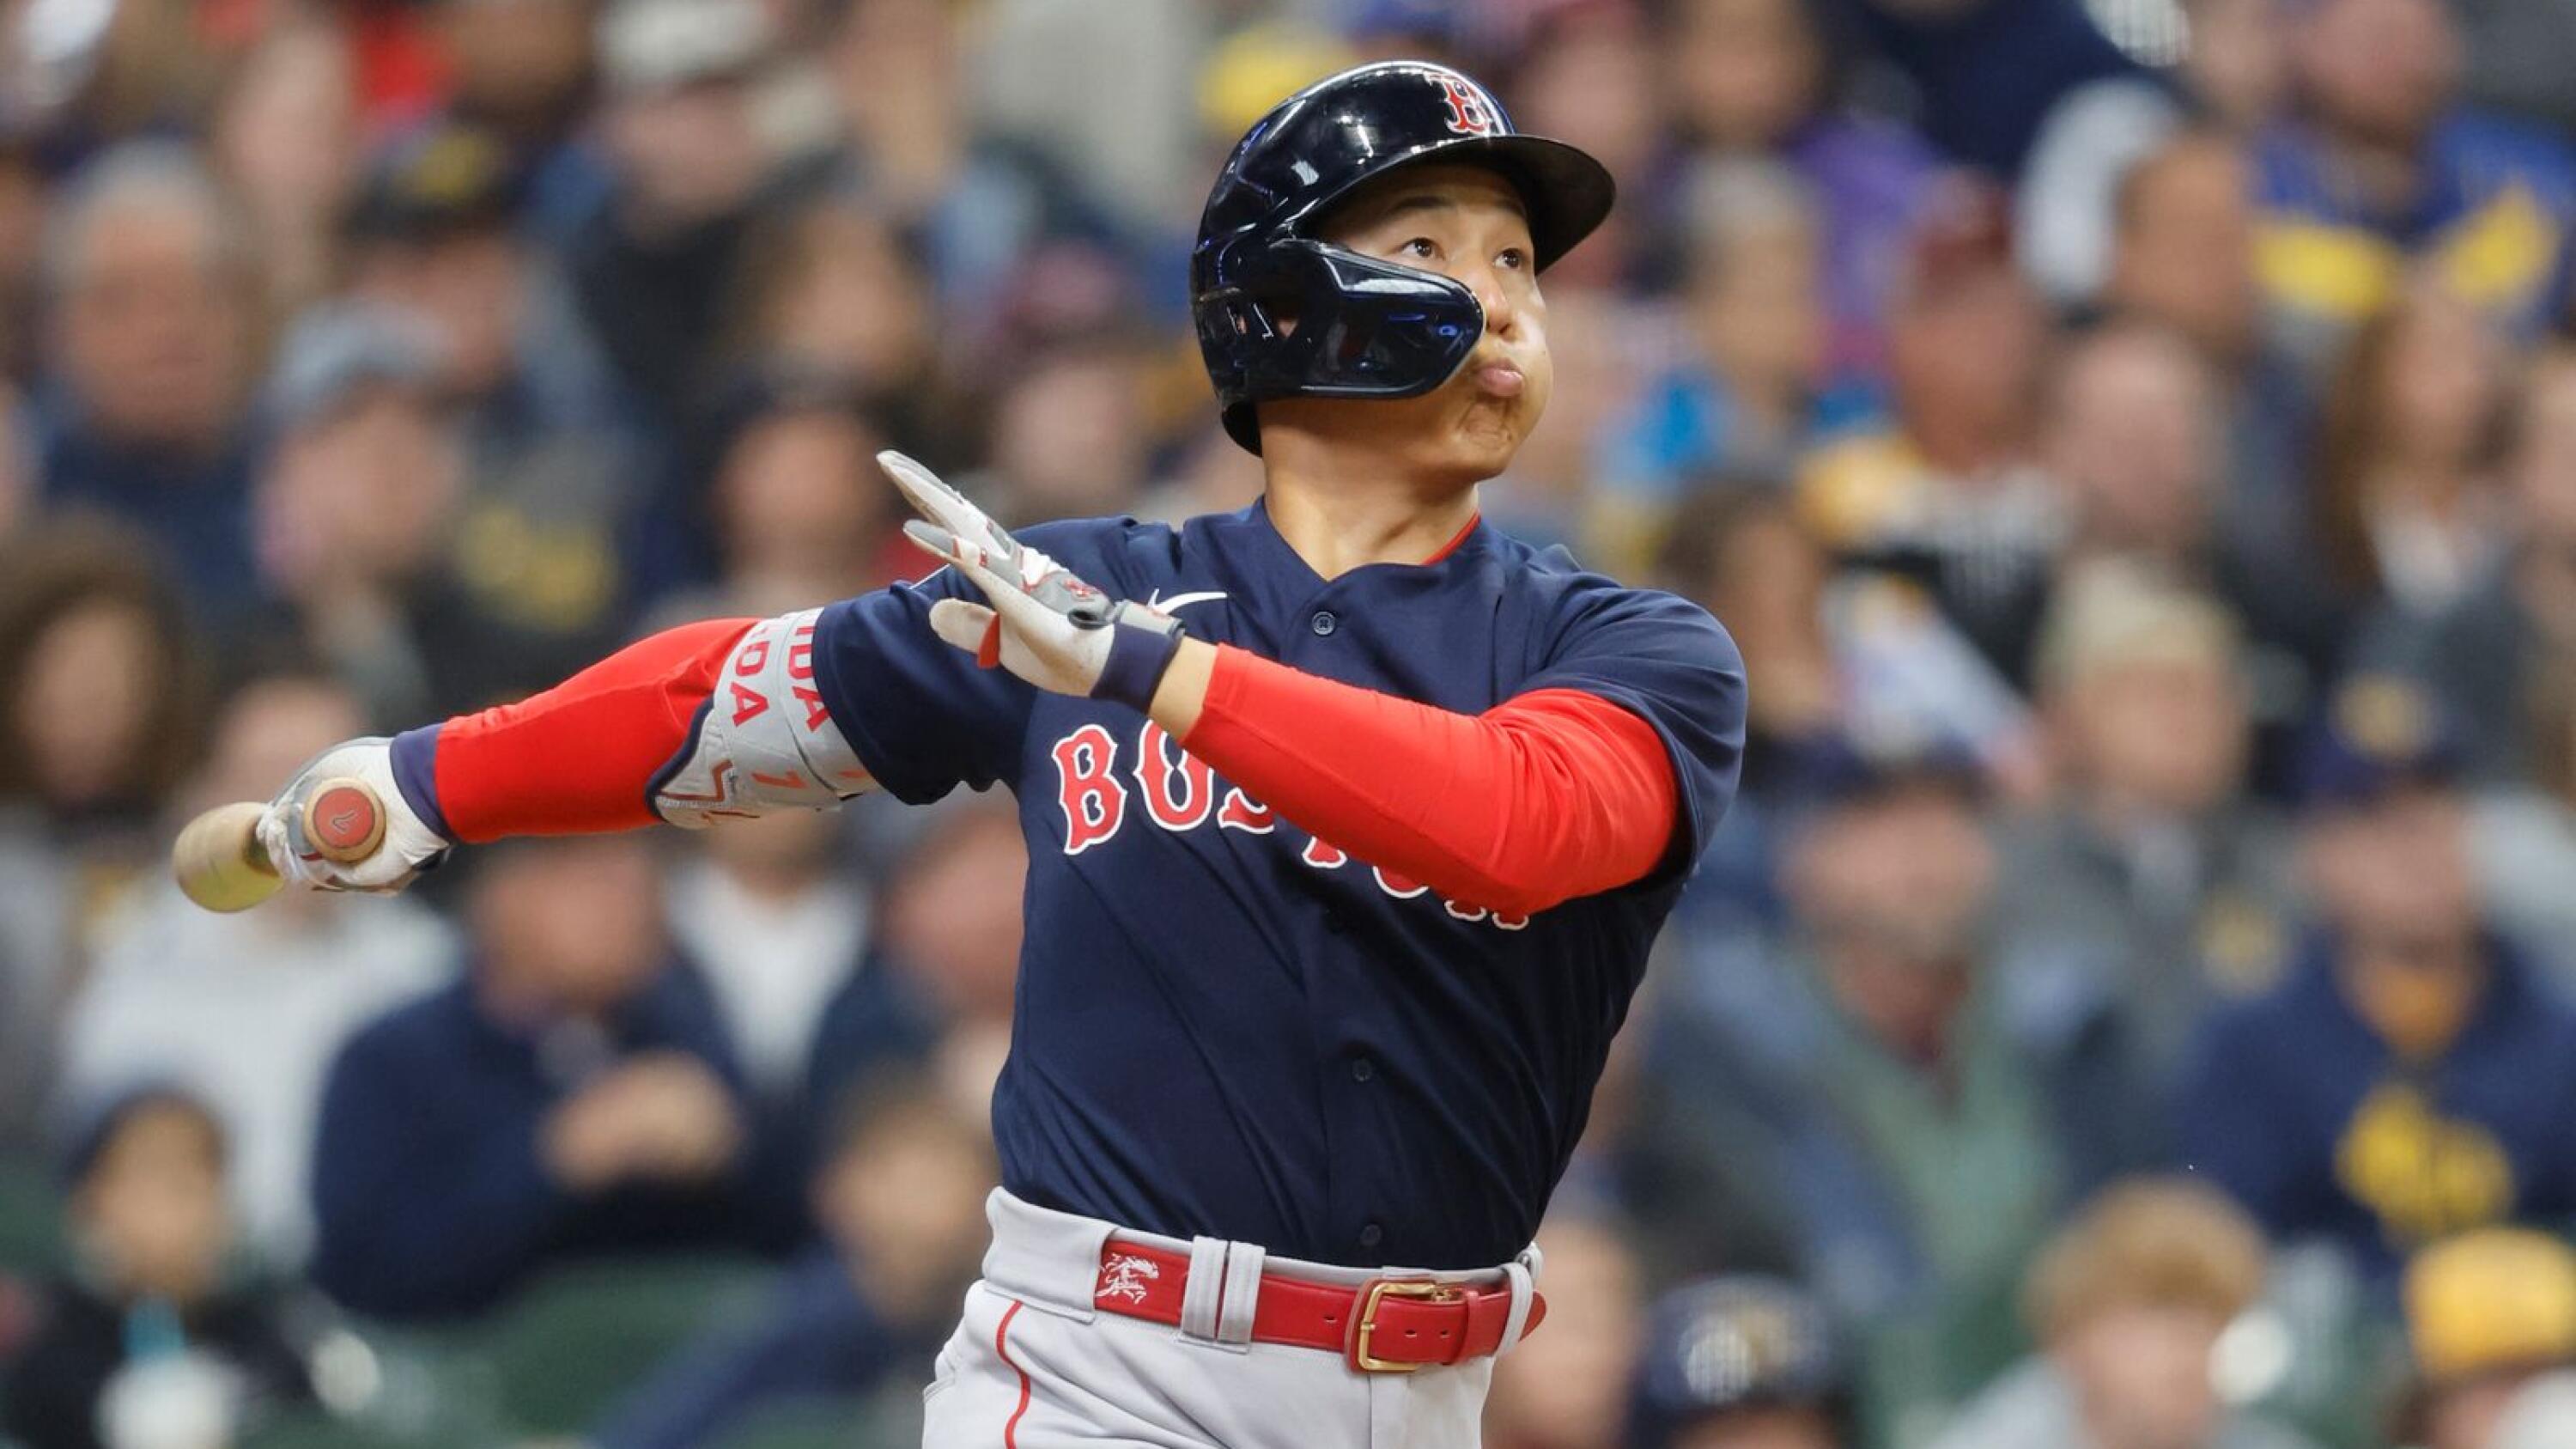 Red Sox open series with victory over Brewers